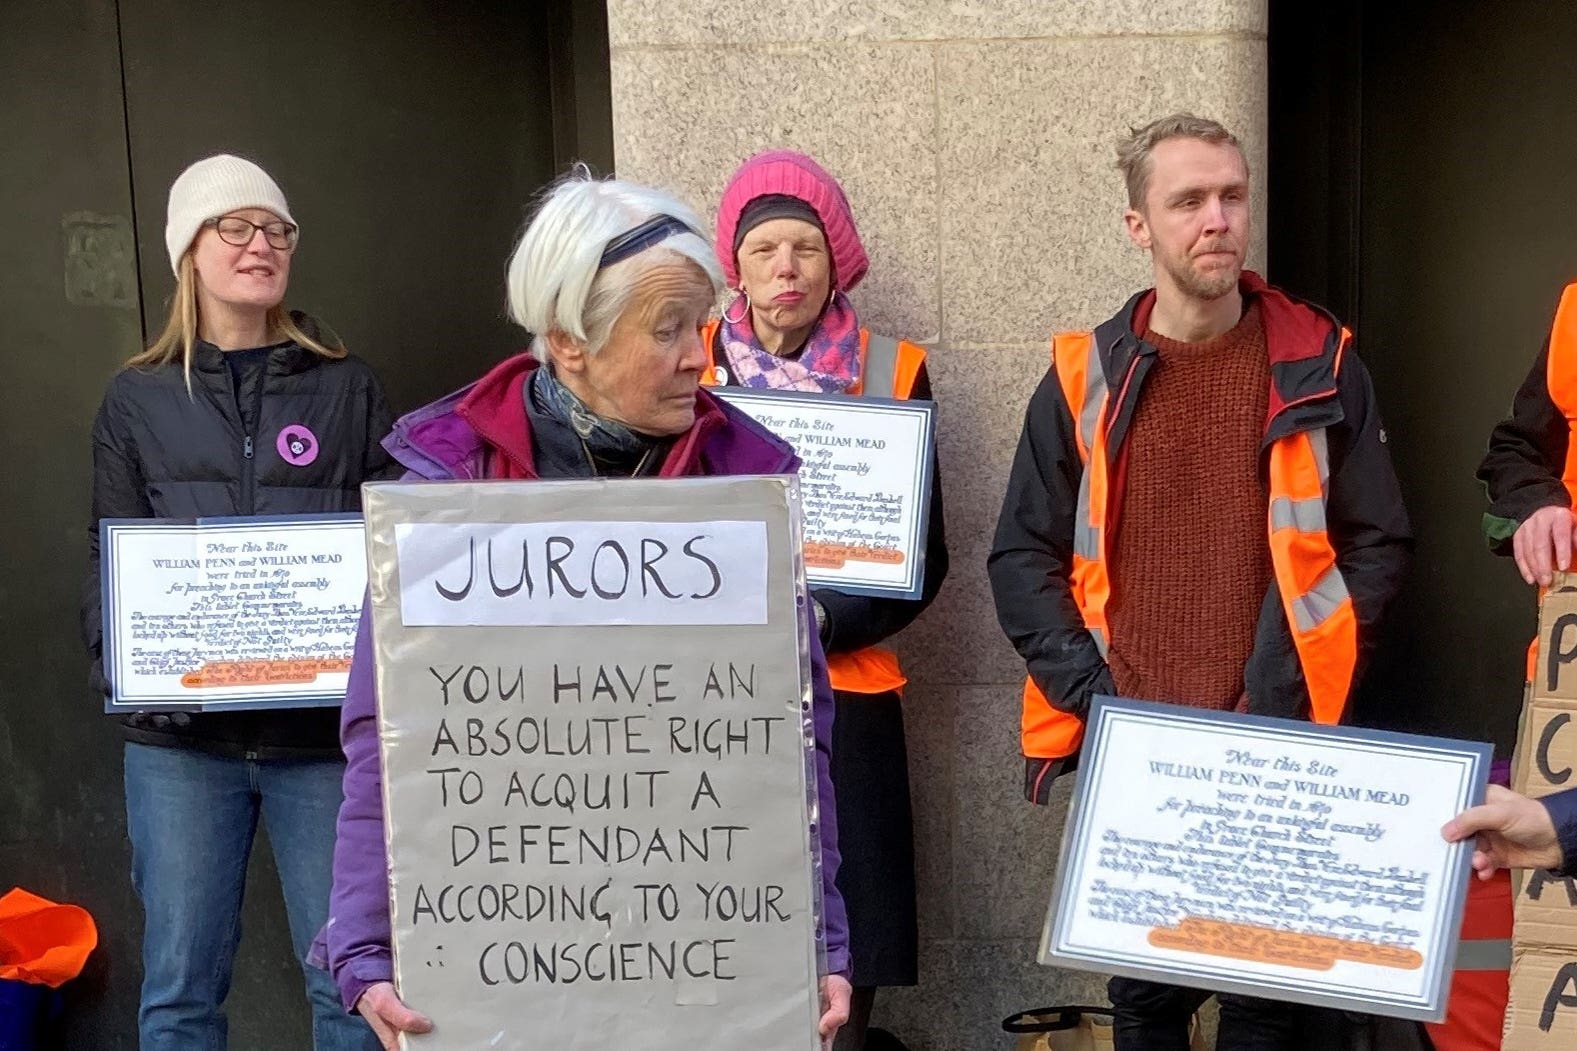 Trudi Warner, a 69-year-old climate change activist, is facing legal proceedings for allegedly holding up a sign in front of jurors